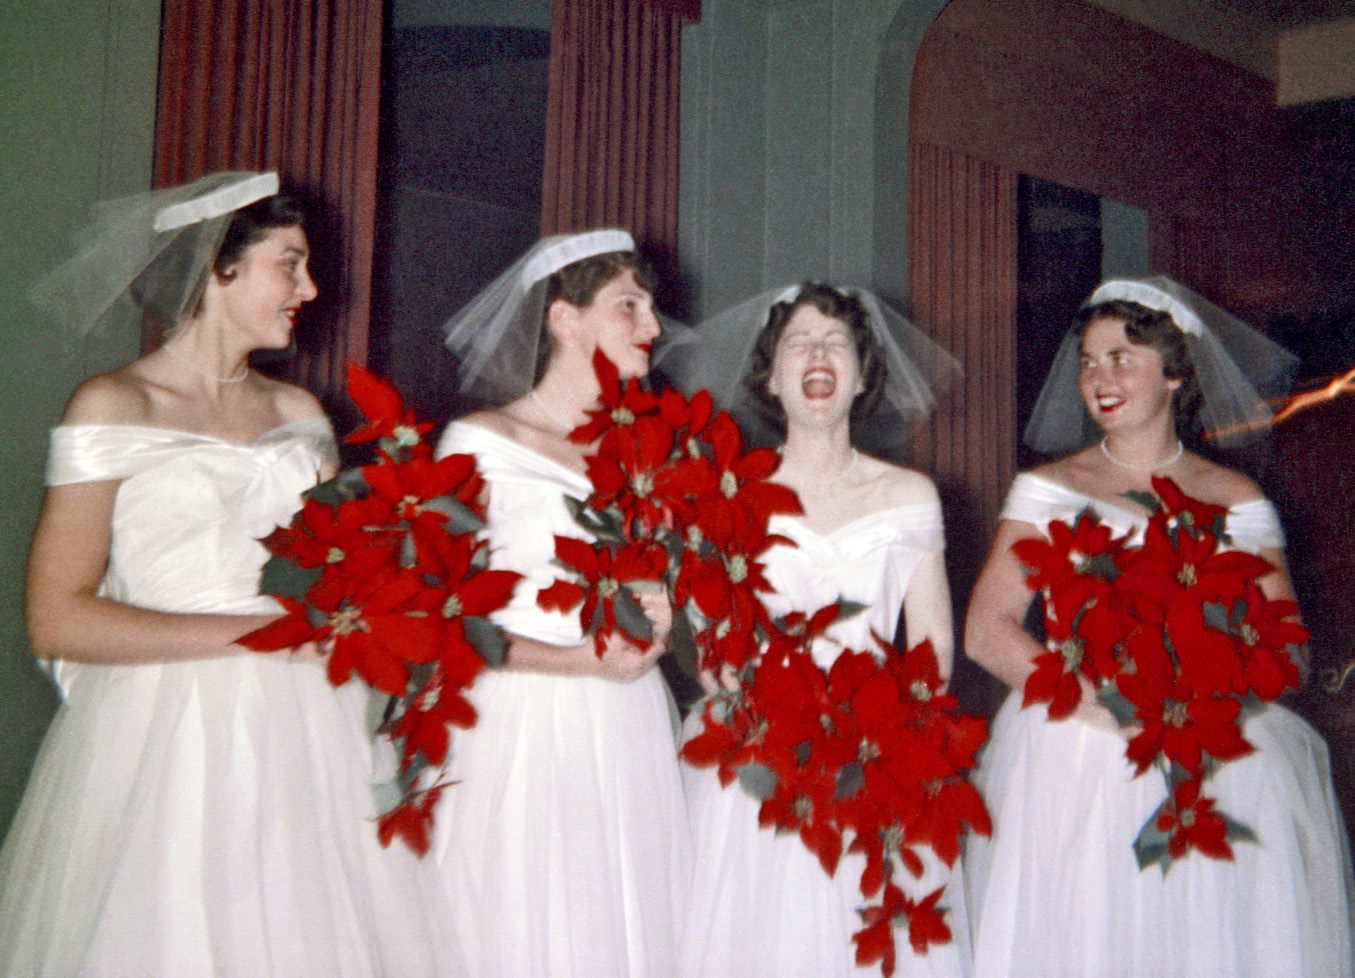 December 12, 1954. A quartet of poinsettia-brandishing bridesmaids share a moment of post-ceremony frivolity at my cousin's wedding reception, held at some ritzy country club on the San Francisco peninsula. I was eight at the time and still have some hazy memory of being in awe of this opulent venue, at the time the fanciest place I'd ever been in. More recently, I was taken aback to read in an article in The San Francisco Chronicle that the use of poinsettias in Christmas decor was now looked down upon by many as, if not merely old school, downright passé. Shows you how much I've been paying attention. My brother shot this 120 620 Kodacolor, taking advantage of the professional photographer's electronic flash by opening the shutter of my sister's Kodak Duaflex moments before the flash fired, thus explaining the candle streak at the right. View full size.